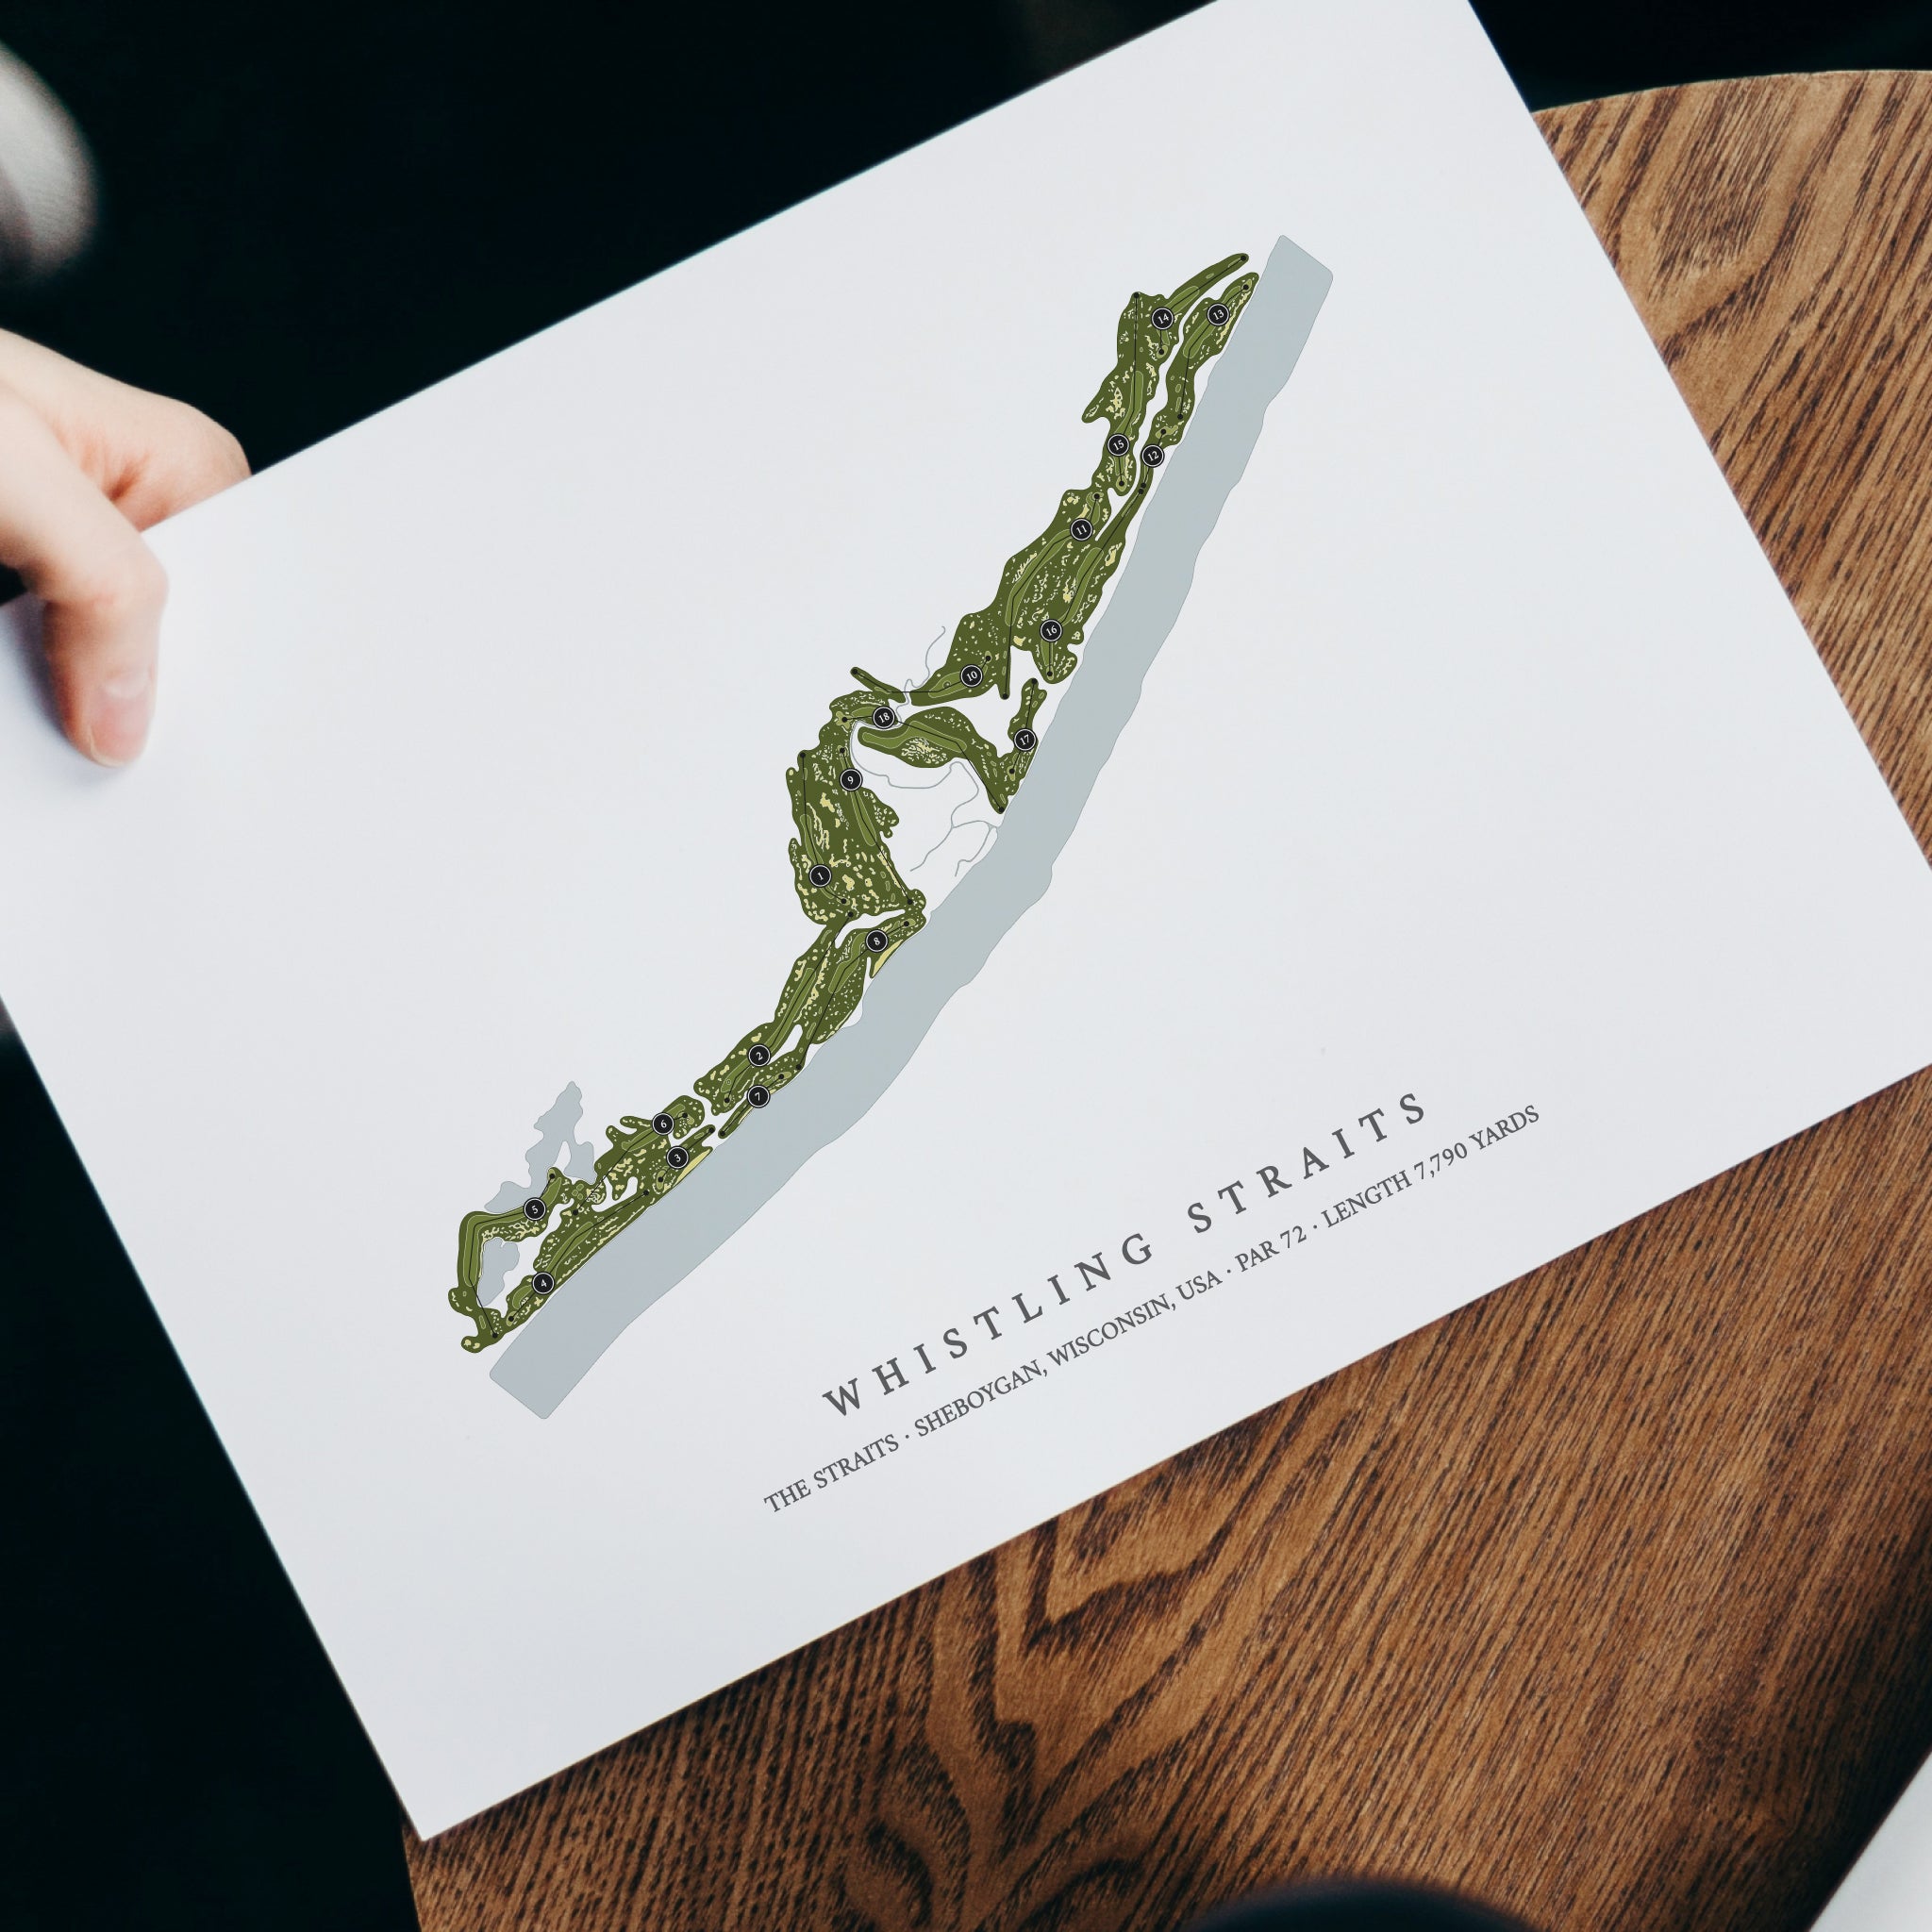 Whistling Straits - The Straits | Golf Course Print | With Laptop 